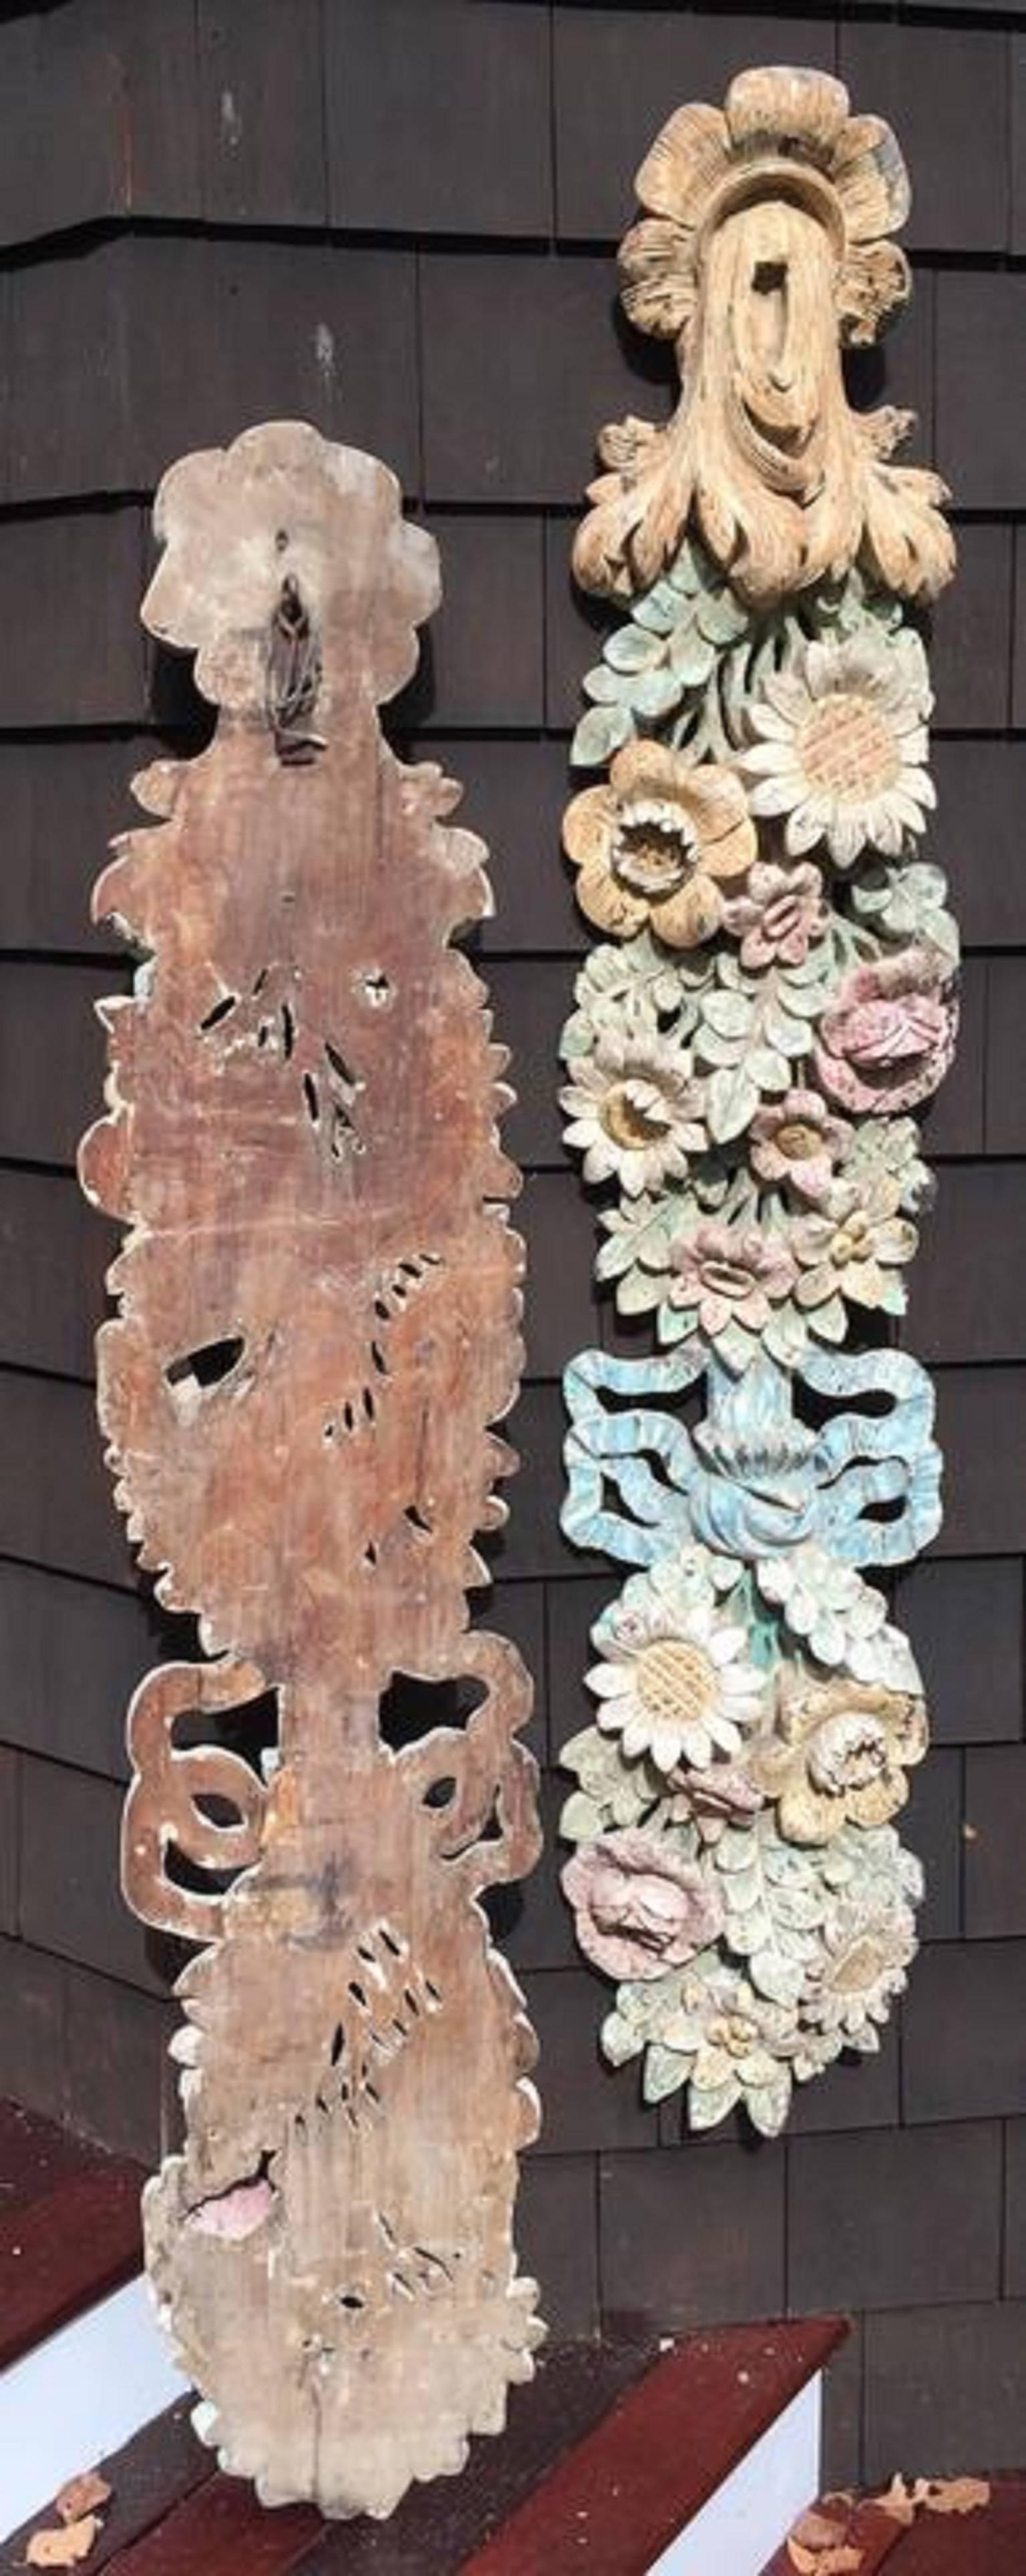 These beautiful floral garlands are hand-carved and painted in pastels in the style of Grinling Gibbons in the Chippendale style made in France, circa 1860.